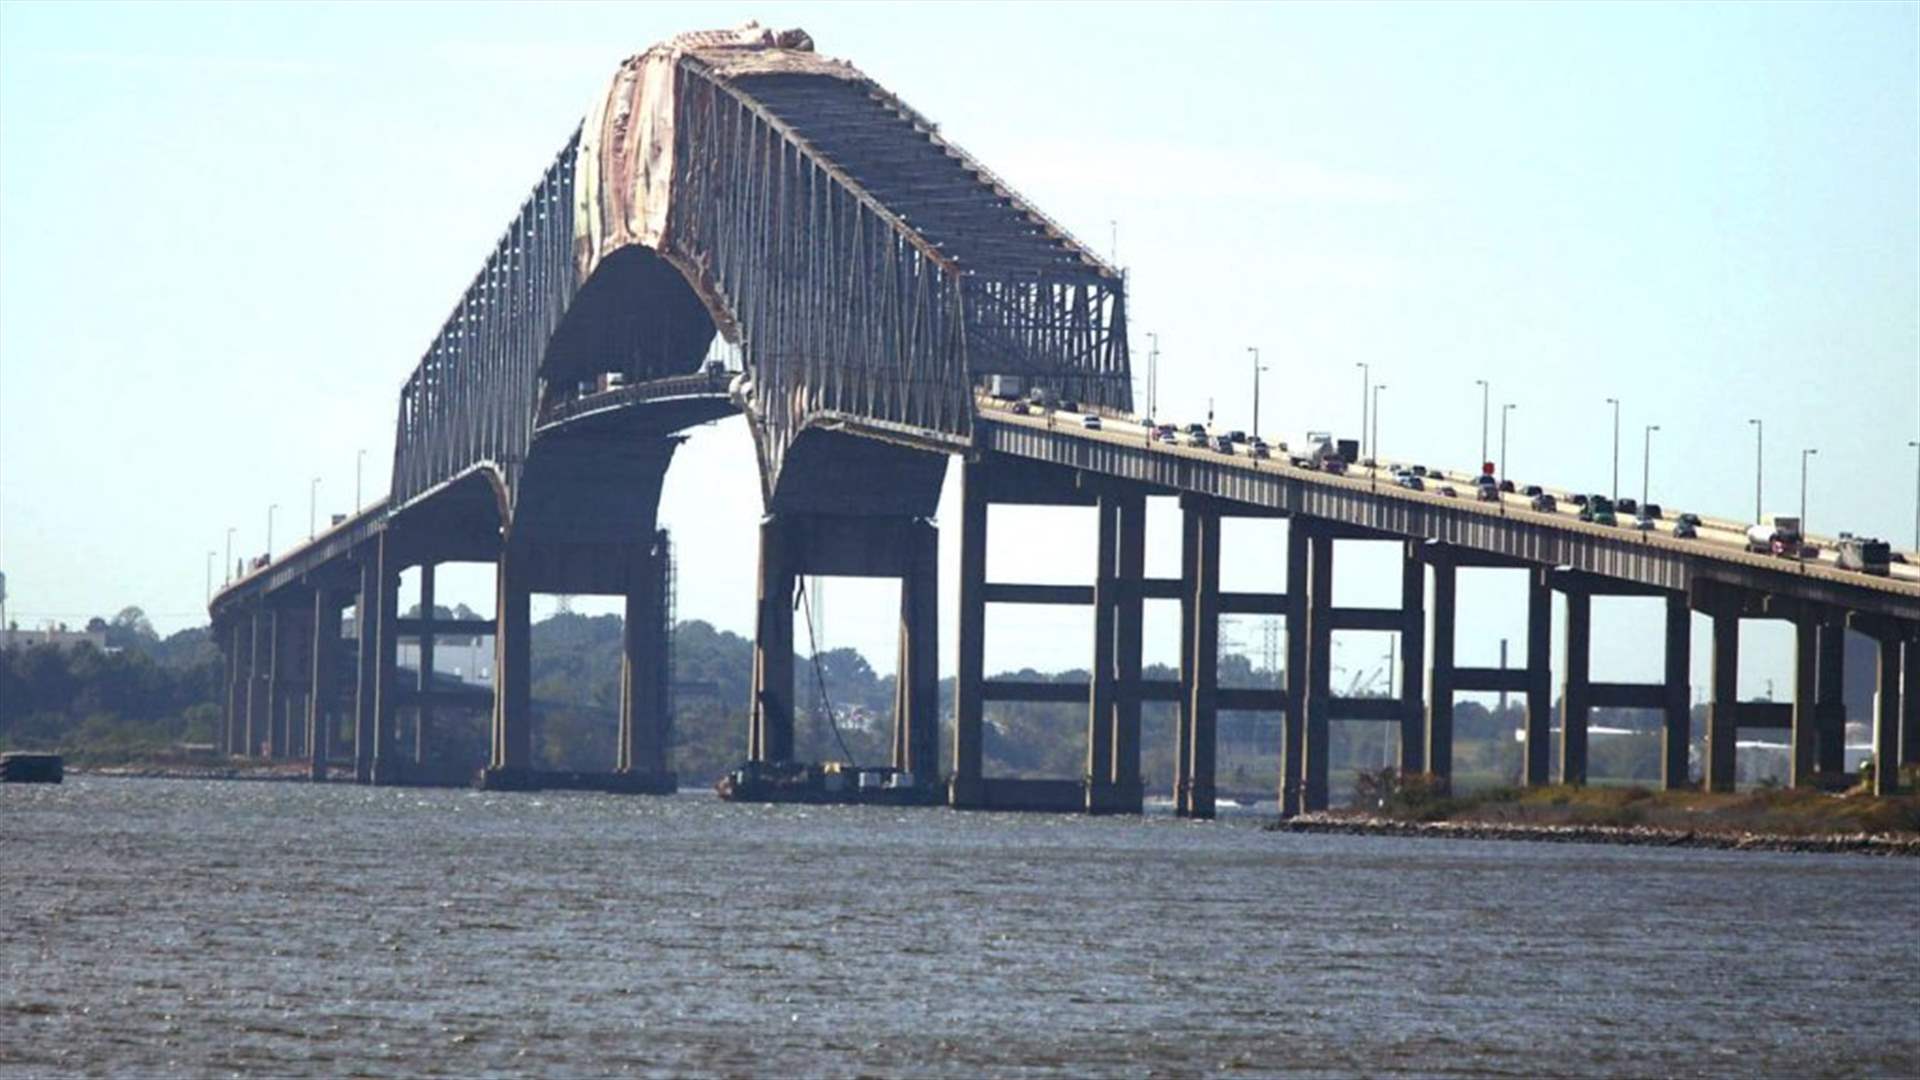 Part of Baltimore&#39;s Bridge collapses after report of ship impact